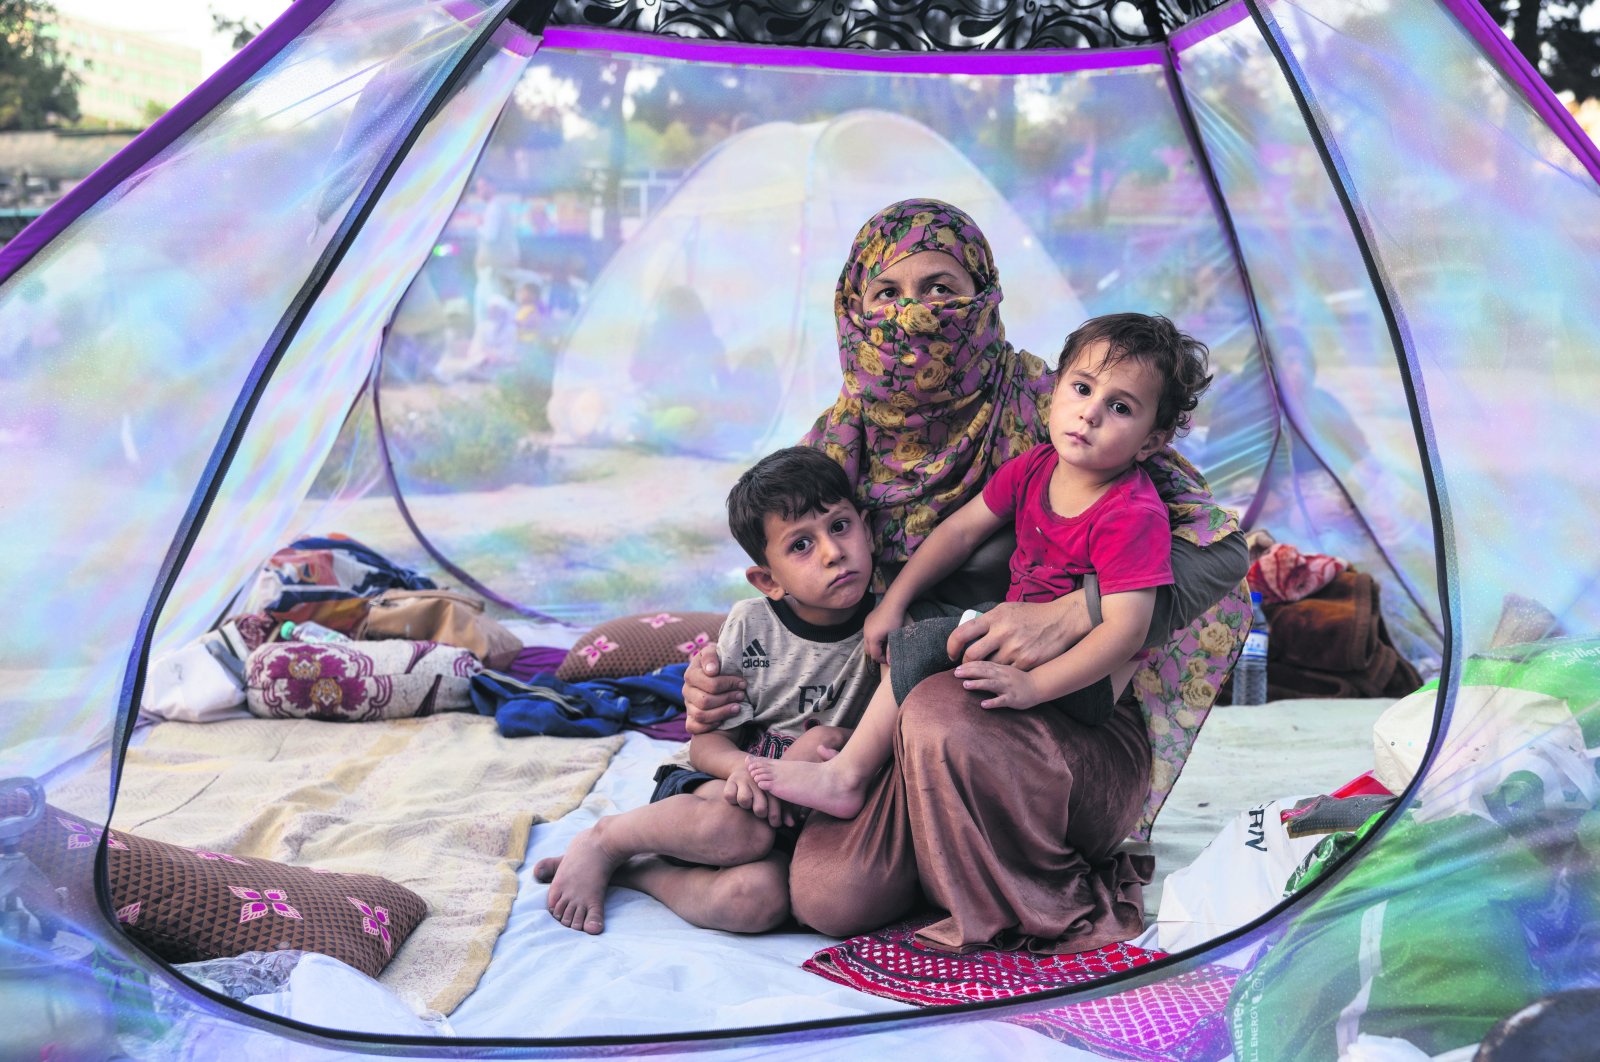 An Afghan family sits in a tent at a makeshift camp for displaced people in Kabul, Afghanistan, Aug. 12, 2021. (Photo by Getty Images)